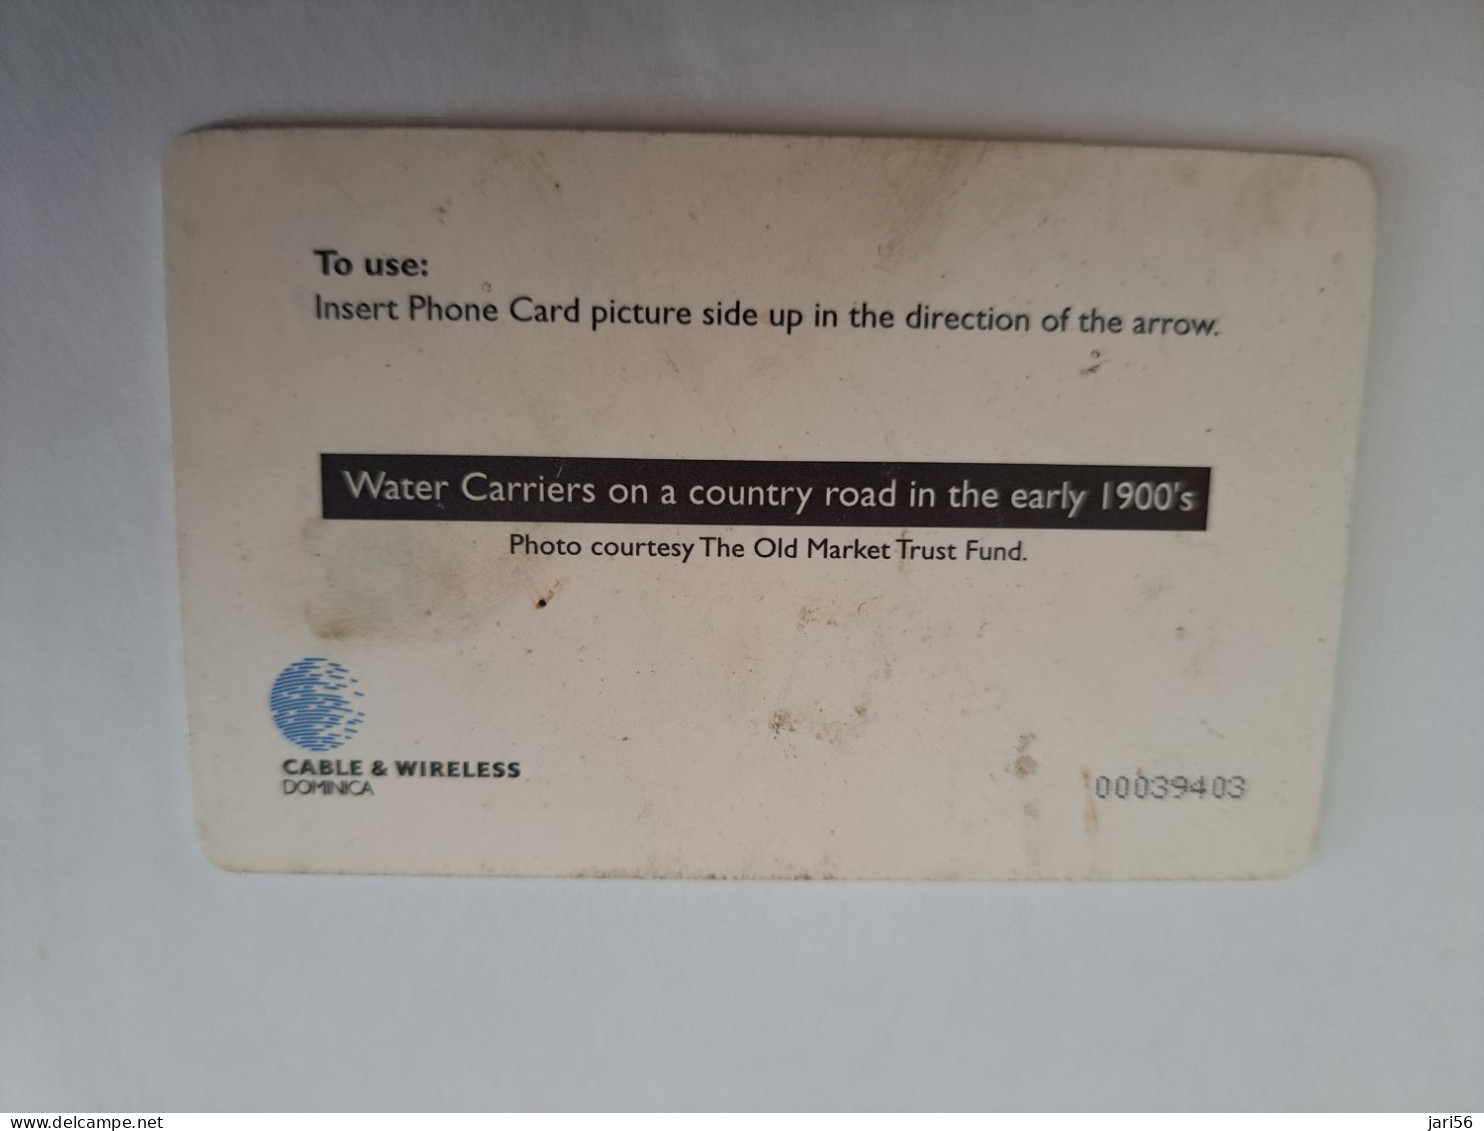 DOMINICA / $20,- CHIP  CARD / DOM - C2/ WATER CARRIERS  1900       Fine Used Card  ** 13340 ** - Dominica